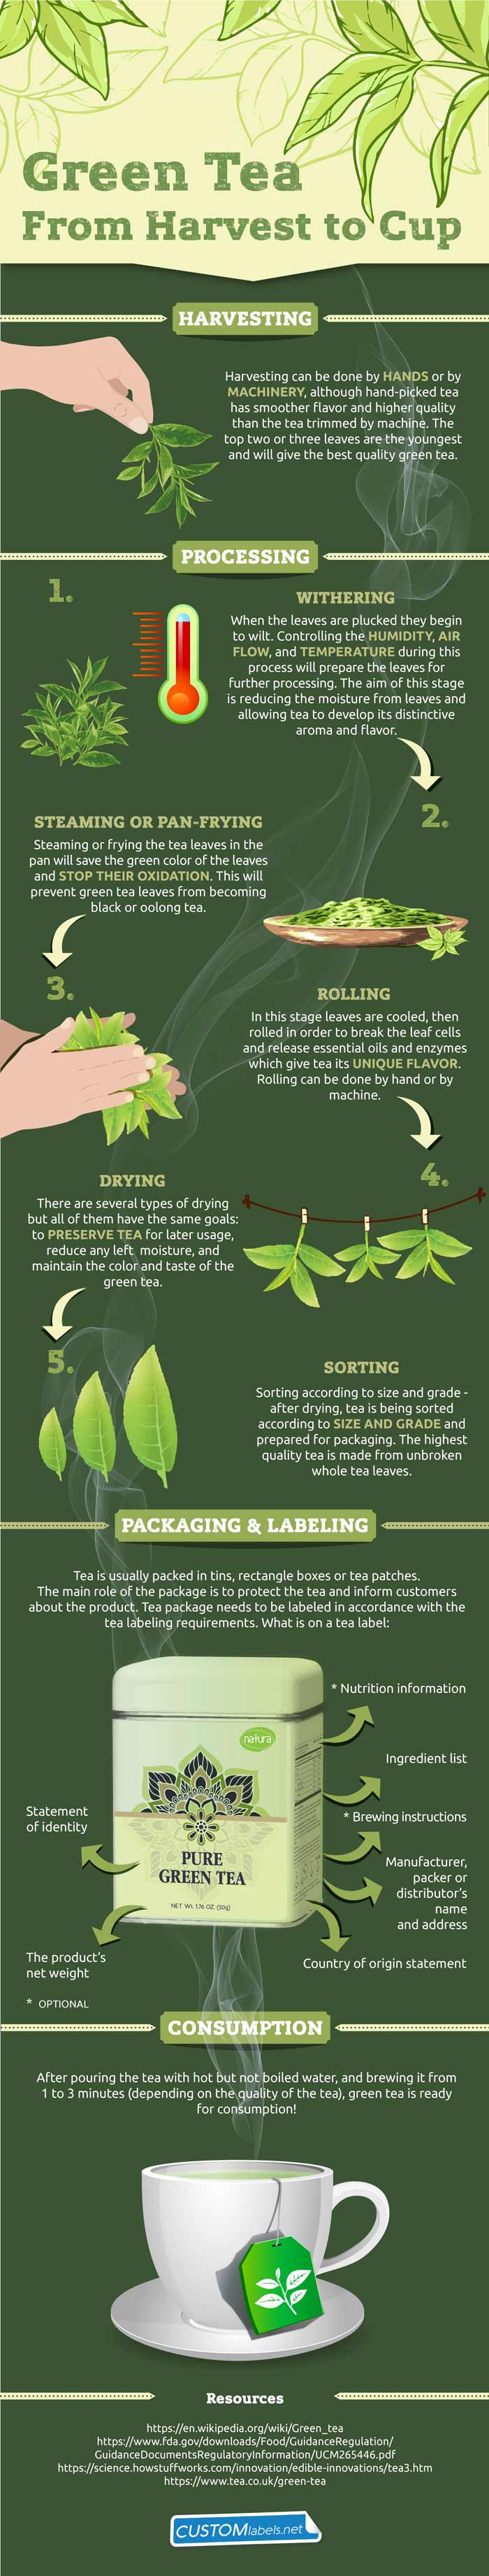 Green tea production journey from harvest to cup (infographic)